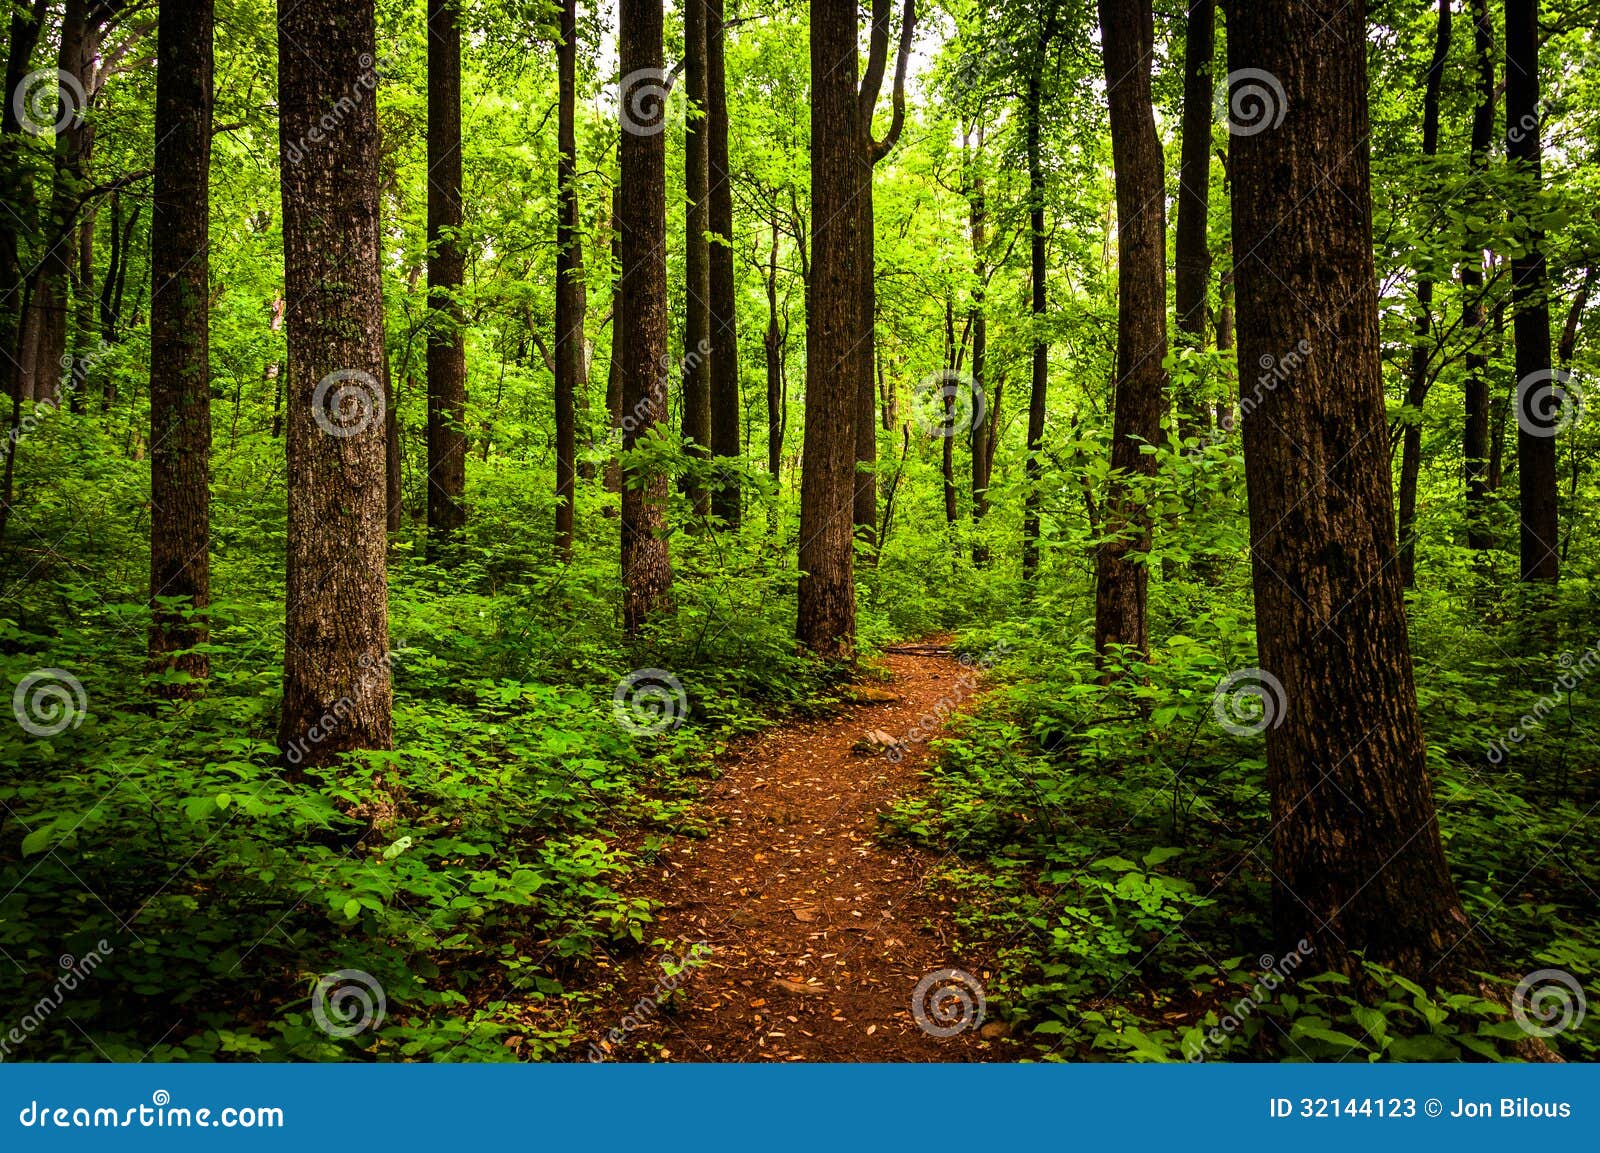 trail through tall trees in a lush forest, shenandoah national park